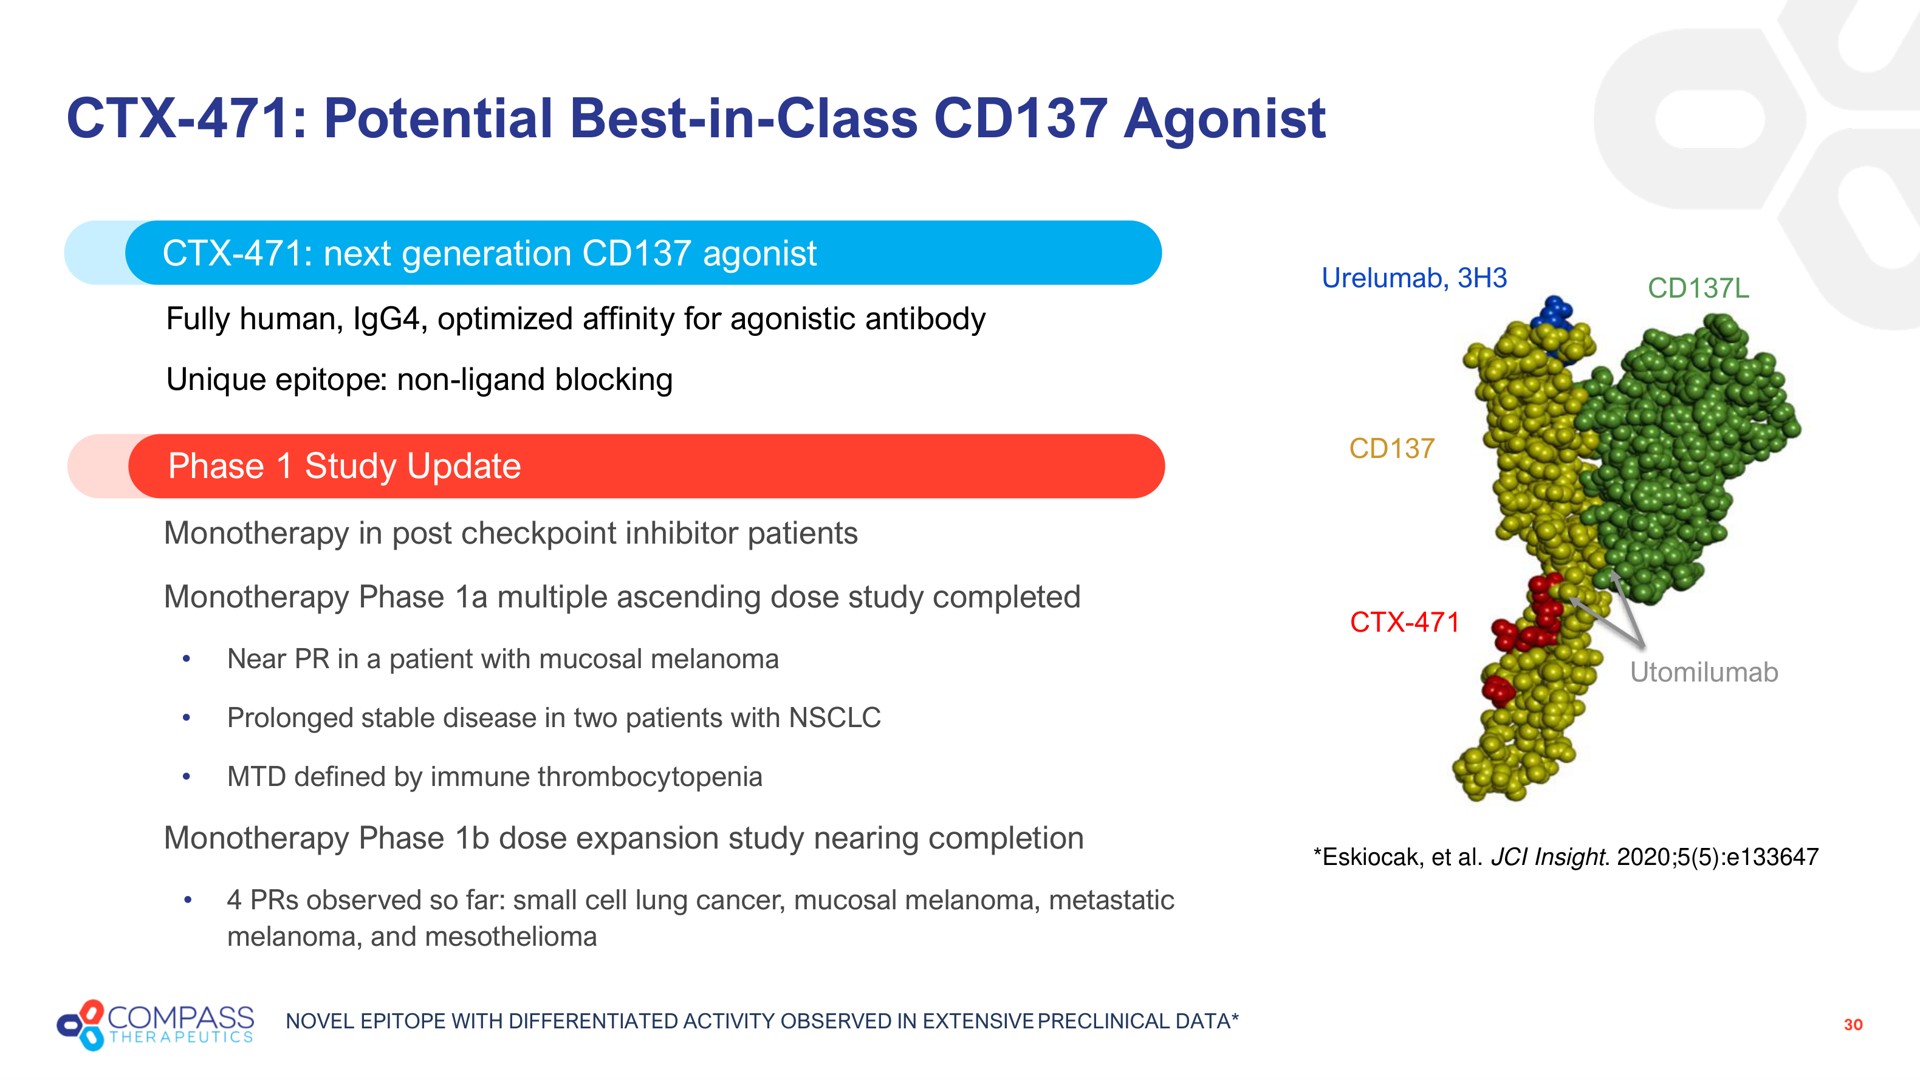 potential best in class agonist | Compass Therapeutics